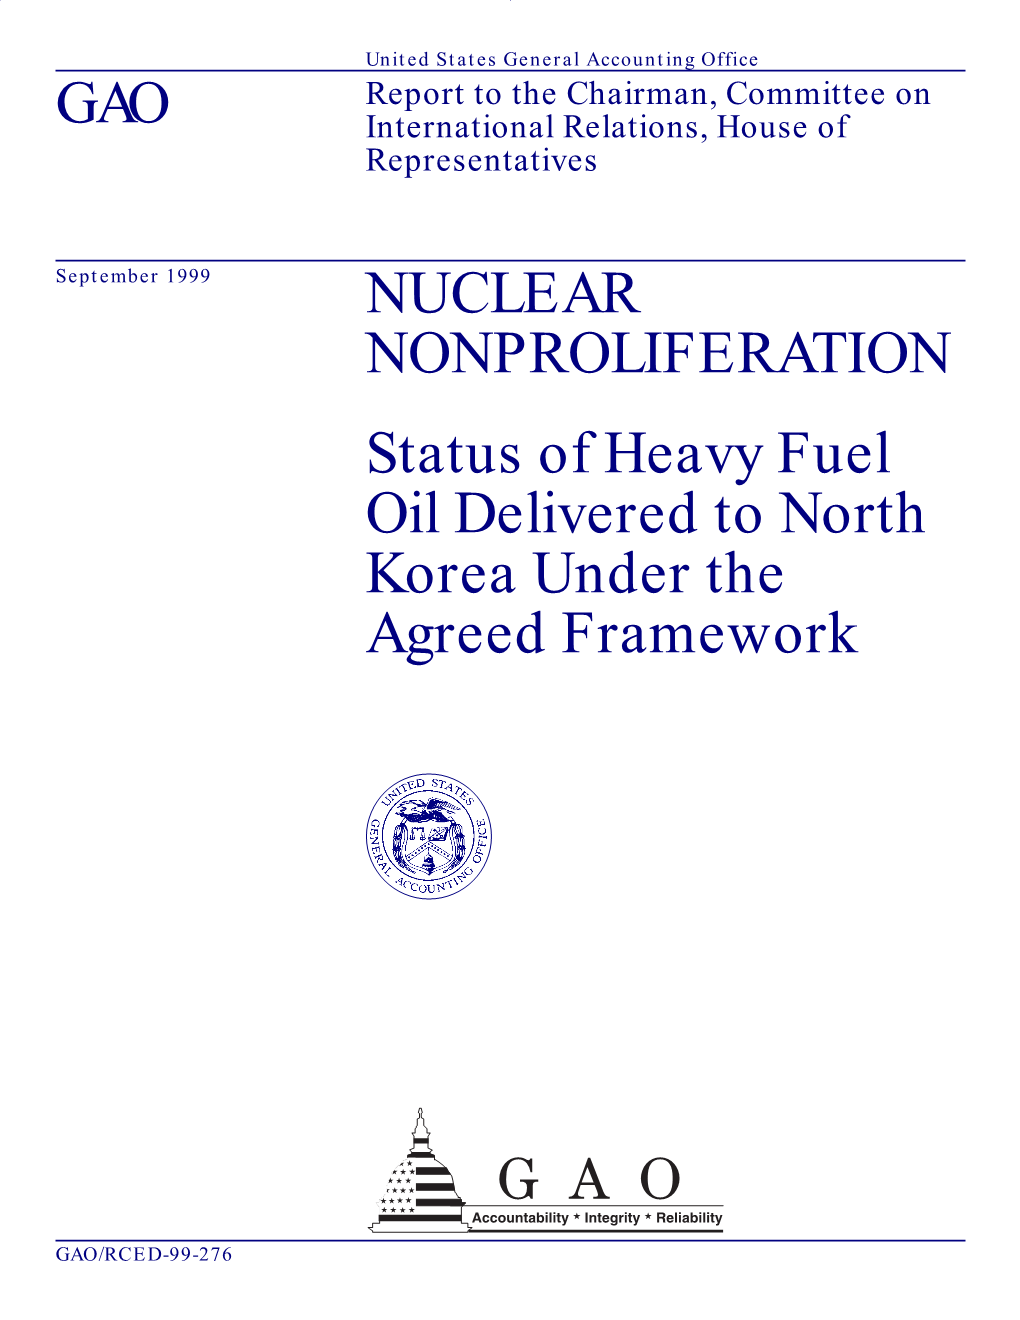 Status of Heavy Fuel Oil Delivered to North Korea Under the Agreed Framework